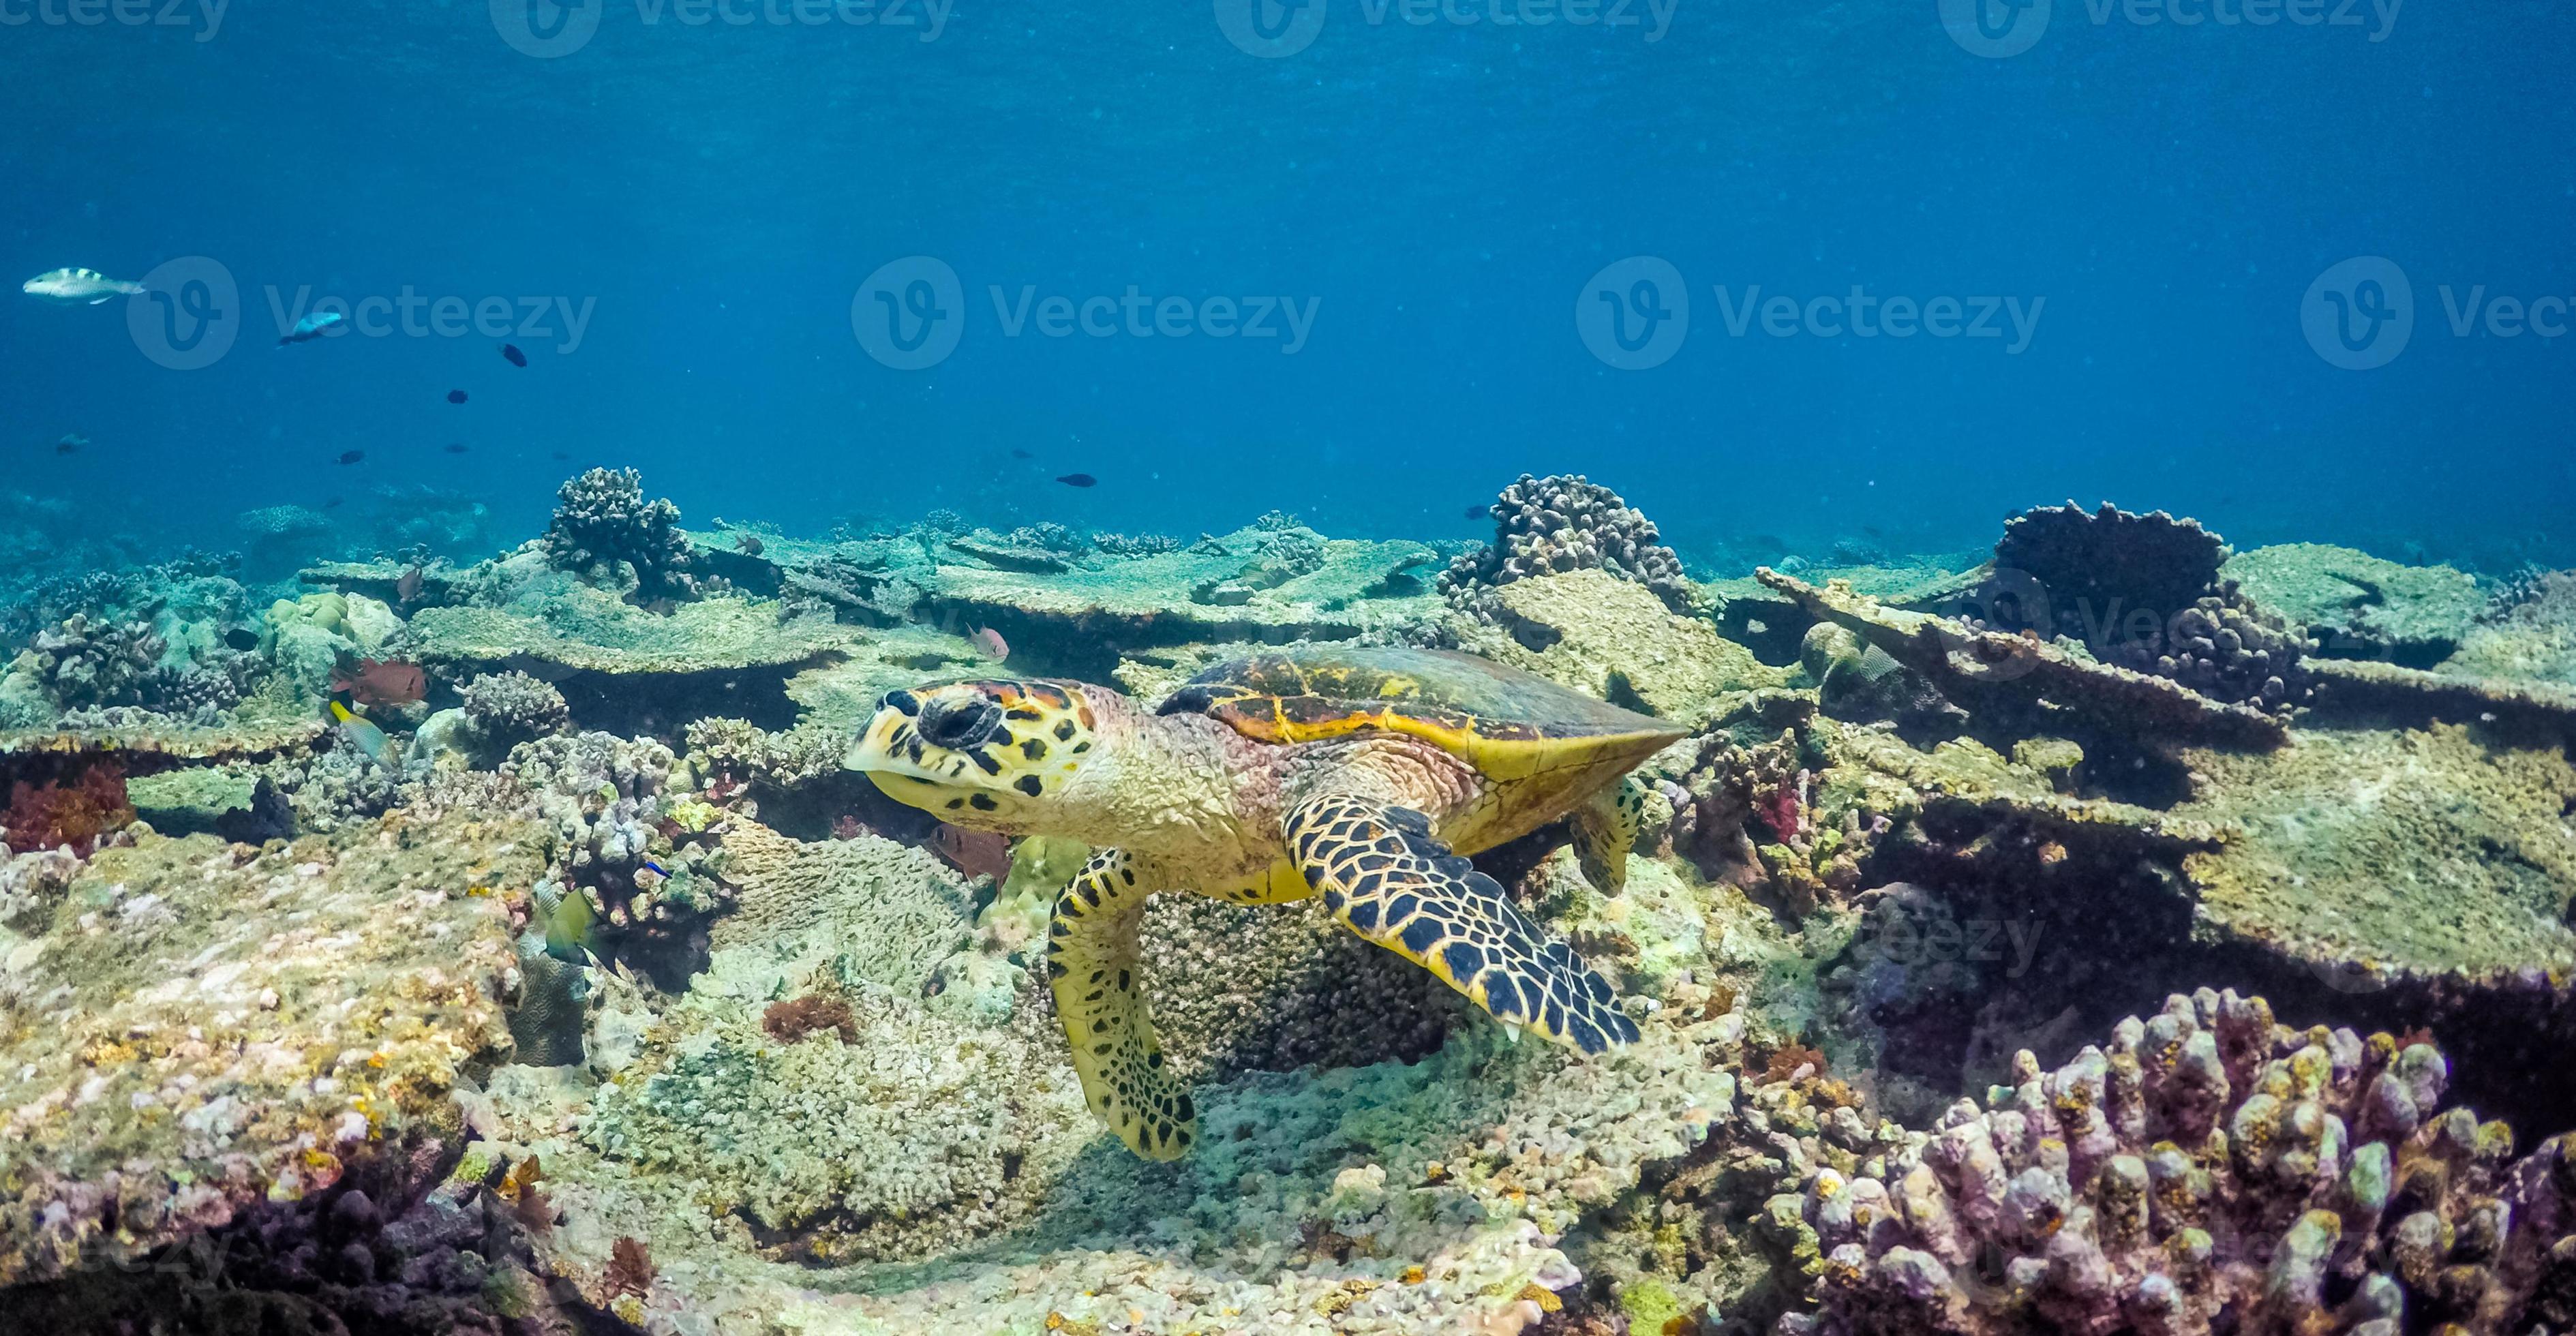 Sea turtle swimming in blue water. Cute sea turtle in blue water of tropical sea. Green turtle underwater photo. Wild marine animal in natural environment. Endangered species of coral reef. Tropical photo